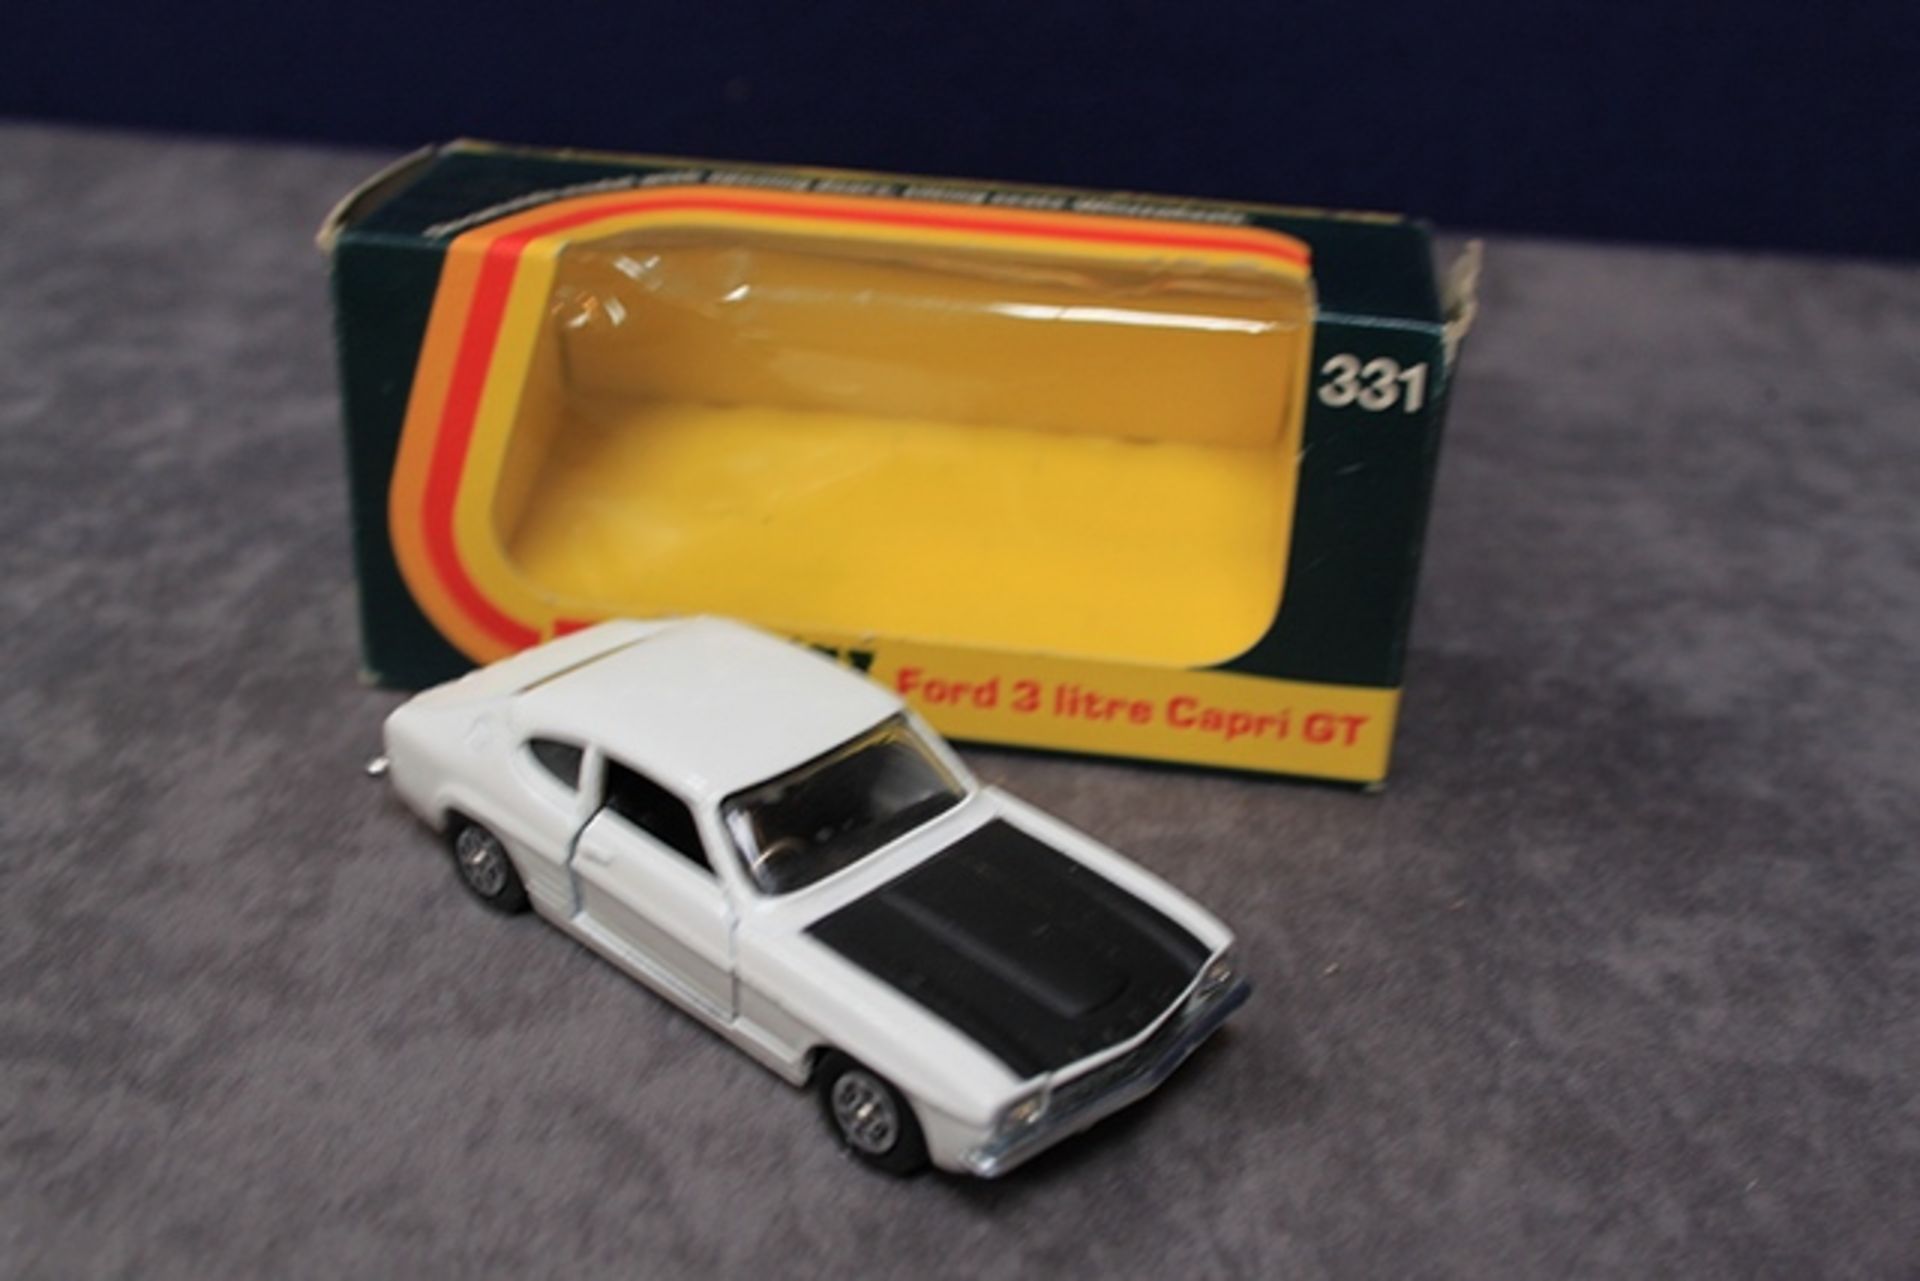 Corgi Diecast Number 331 Ford 3 Litre Capri GT With Excellent Box - Image 3 of 3